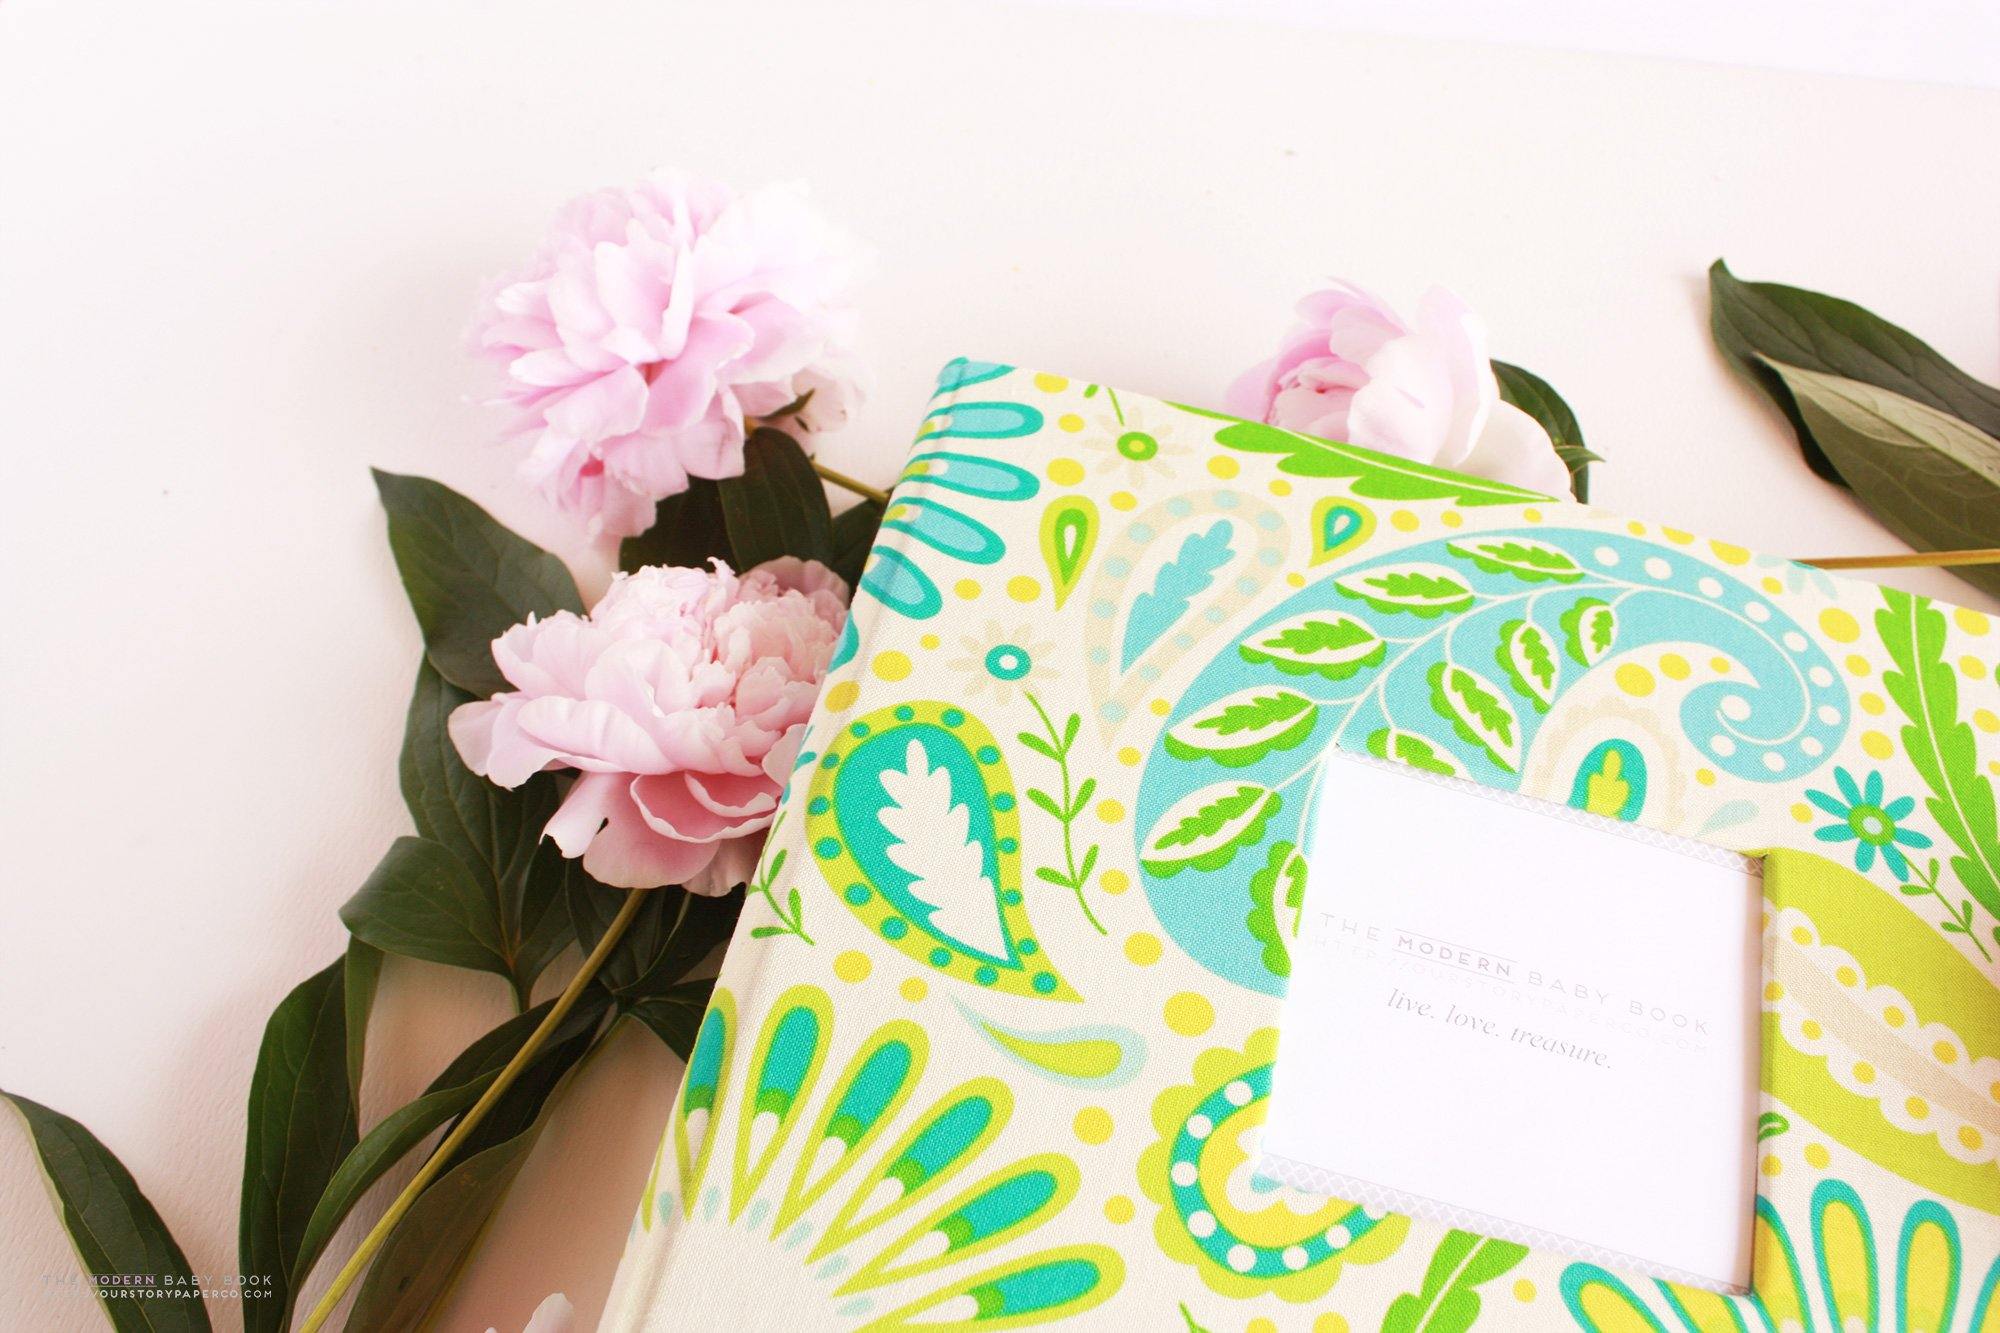 Green Floral Swirls Modern Baby Book - Our Story Paper Co.